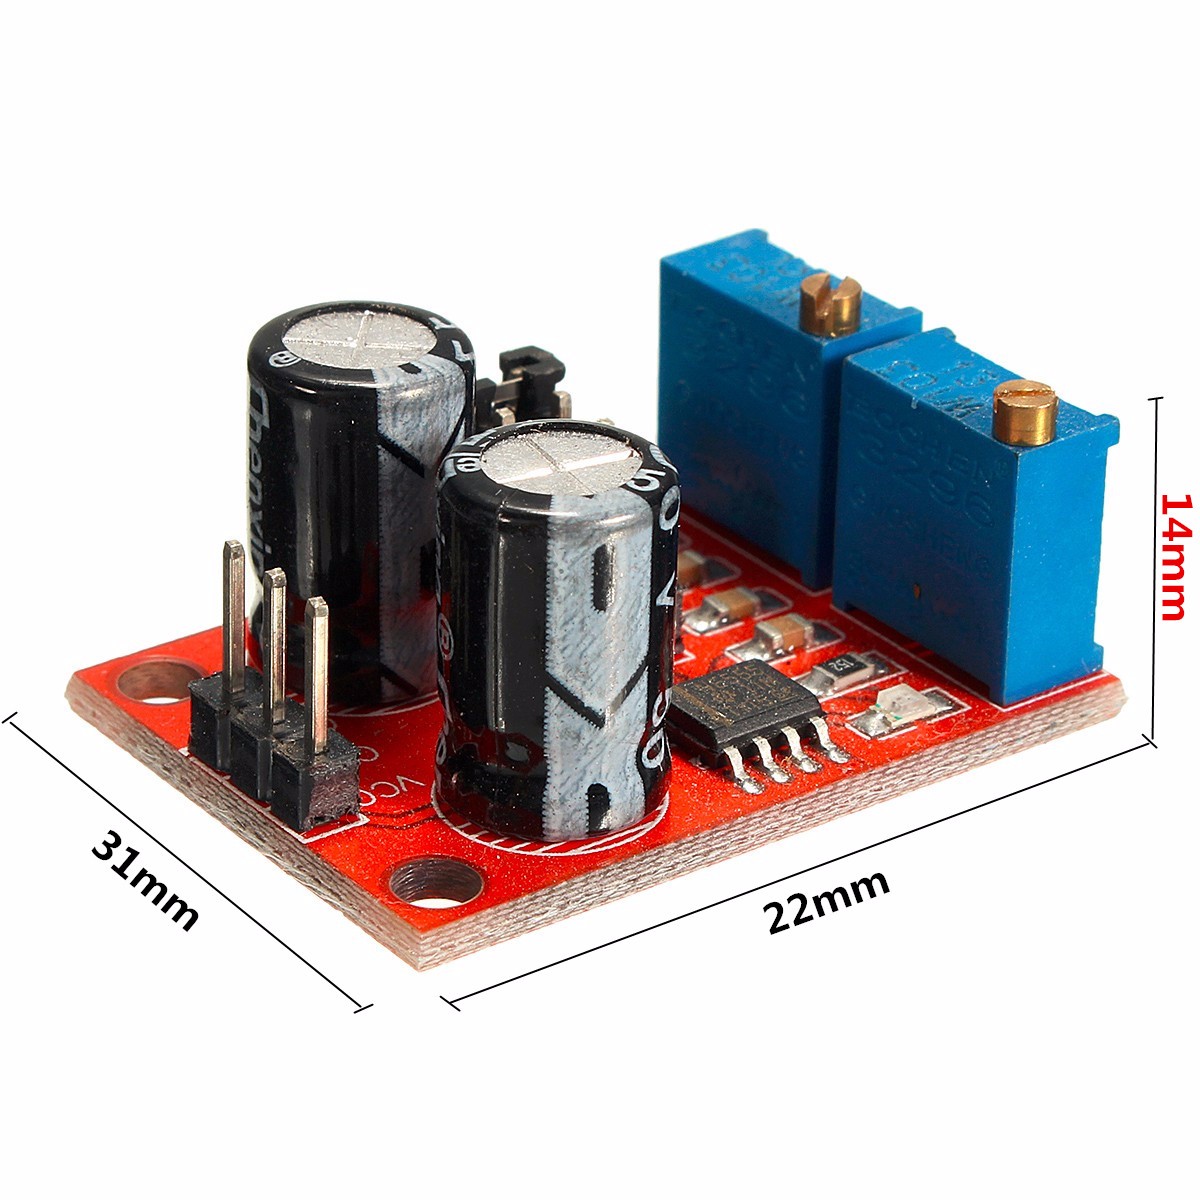 3Pcs-NE555-Pulse-Frequency-Duty-Cycle-Adjustable-Module-Square-Wave-Signal-Generator-1067374